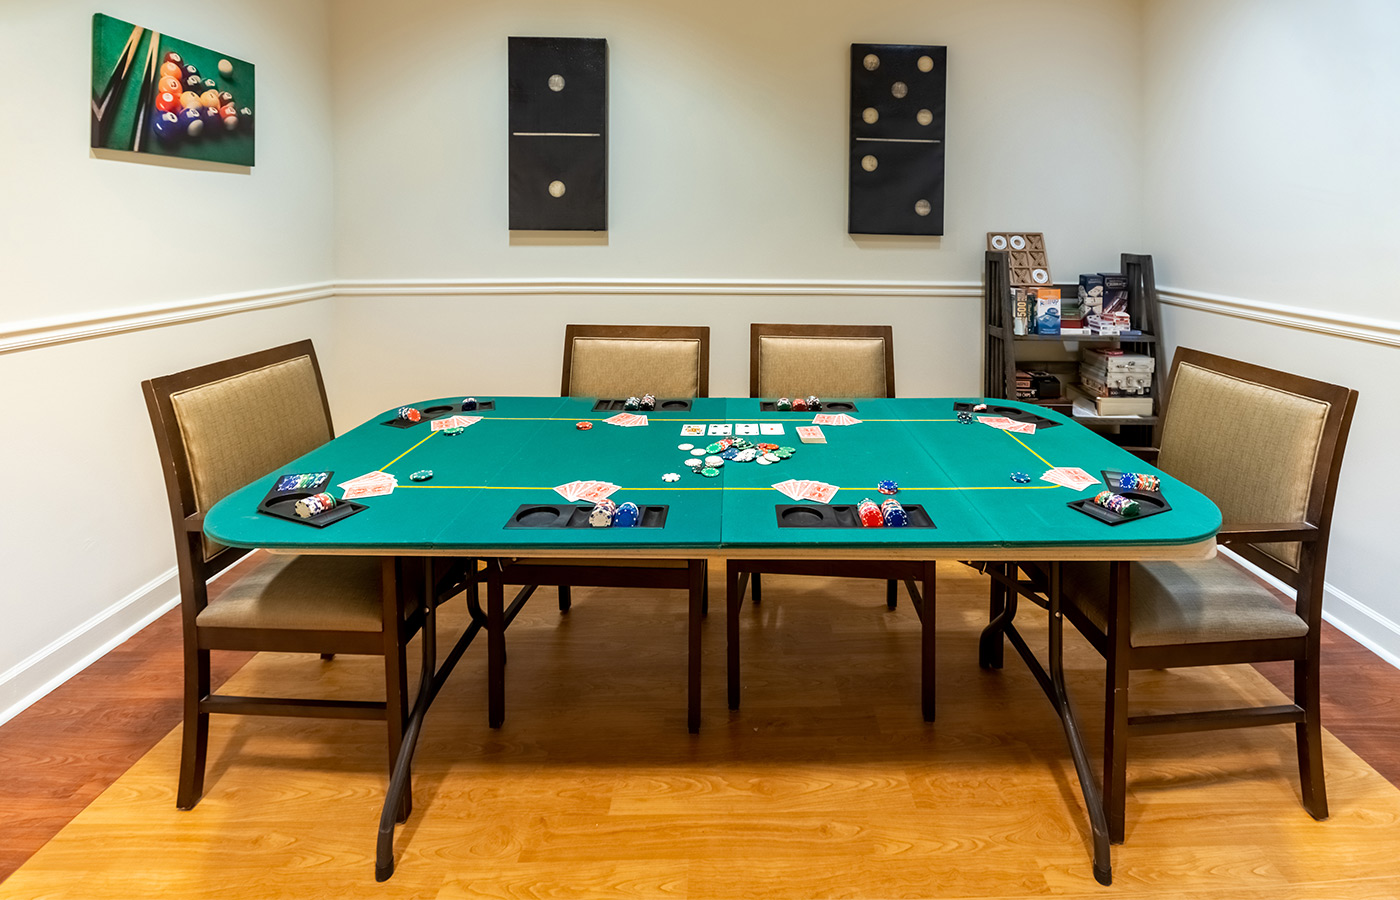 A gaming table for playing cards.